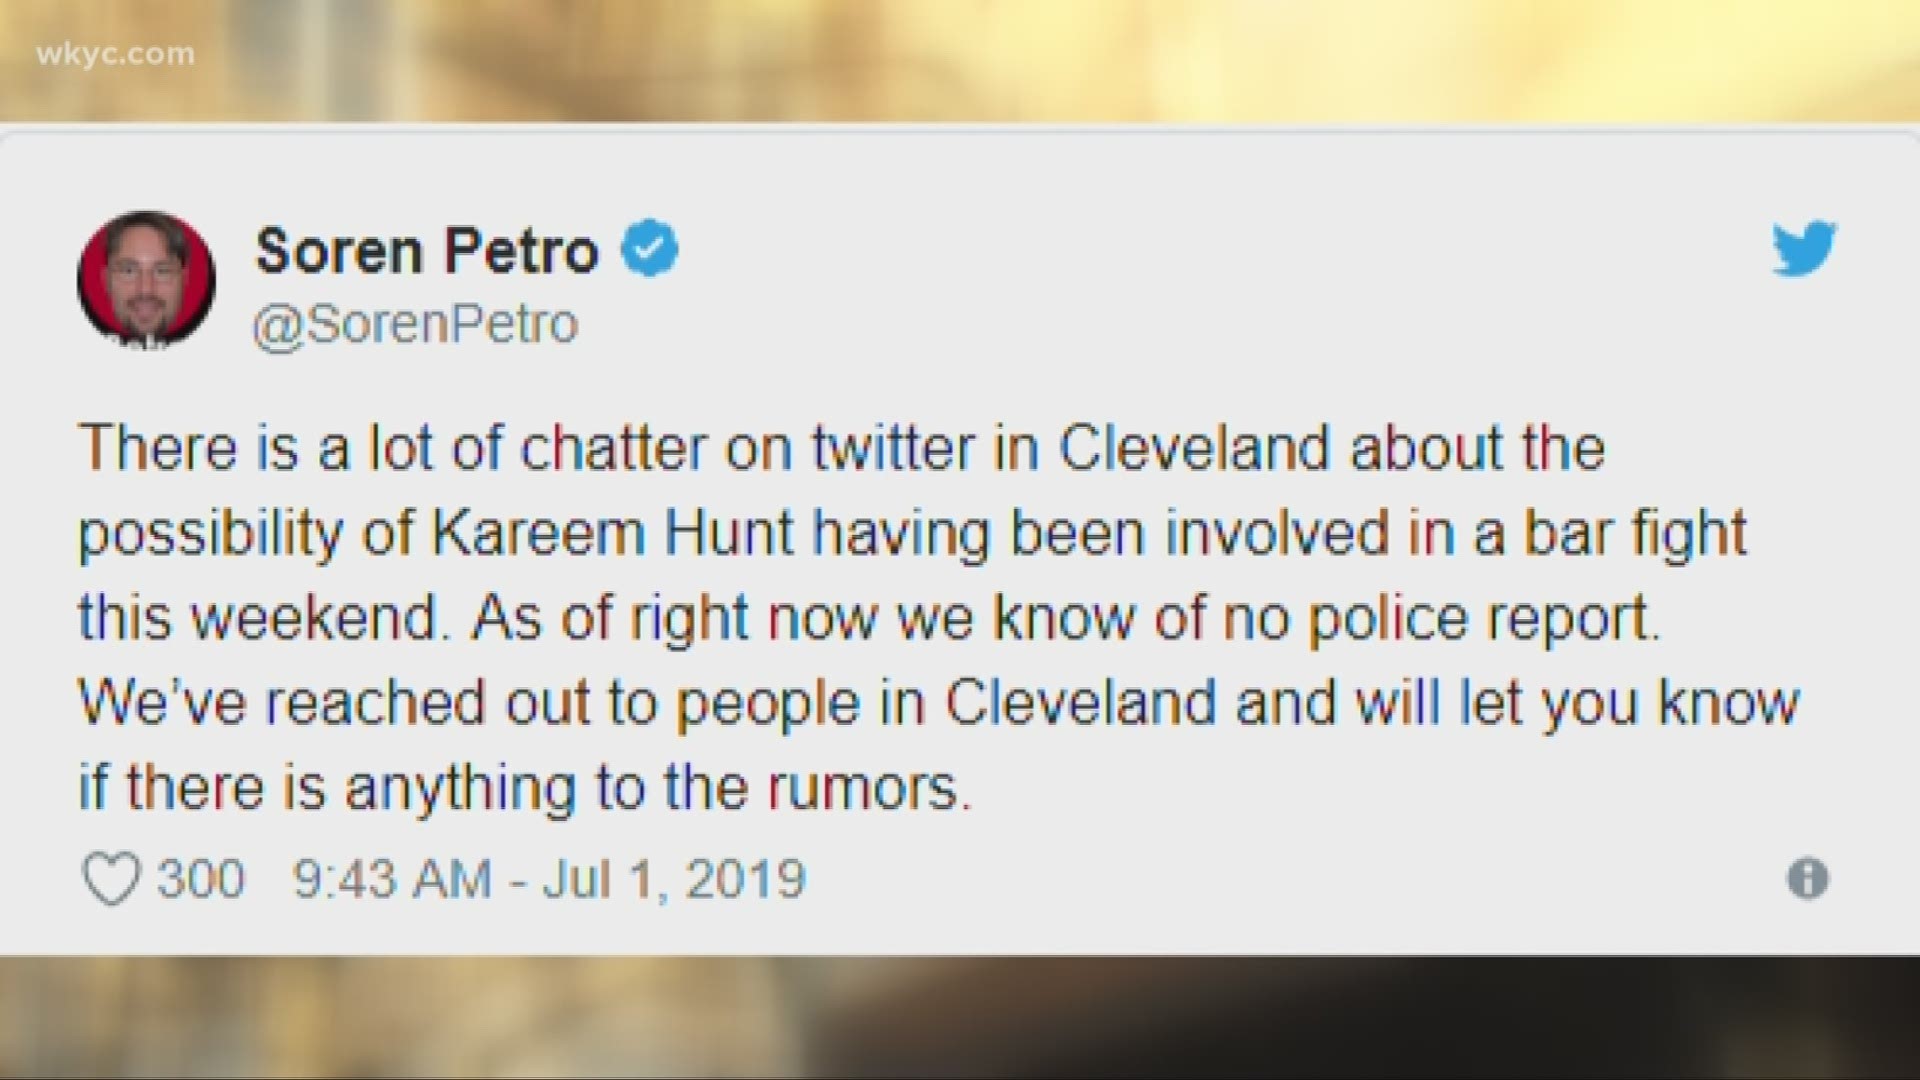 There is a lot of social media buzz over whether Kareem Hunt was in a possible bar fight in Cleveland over the weekend.